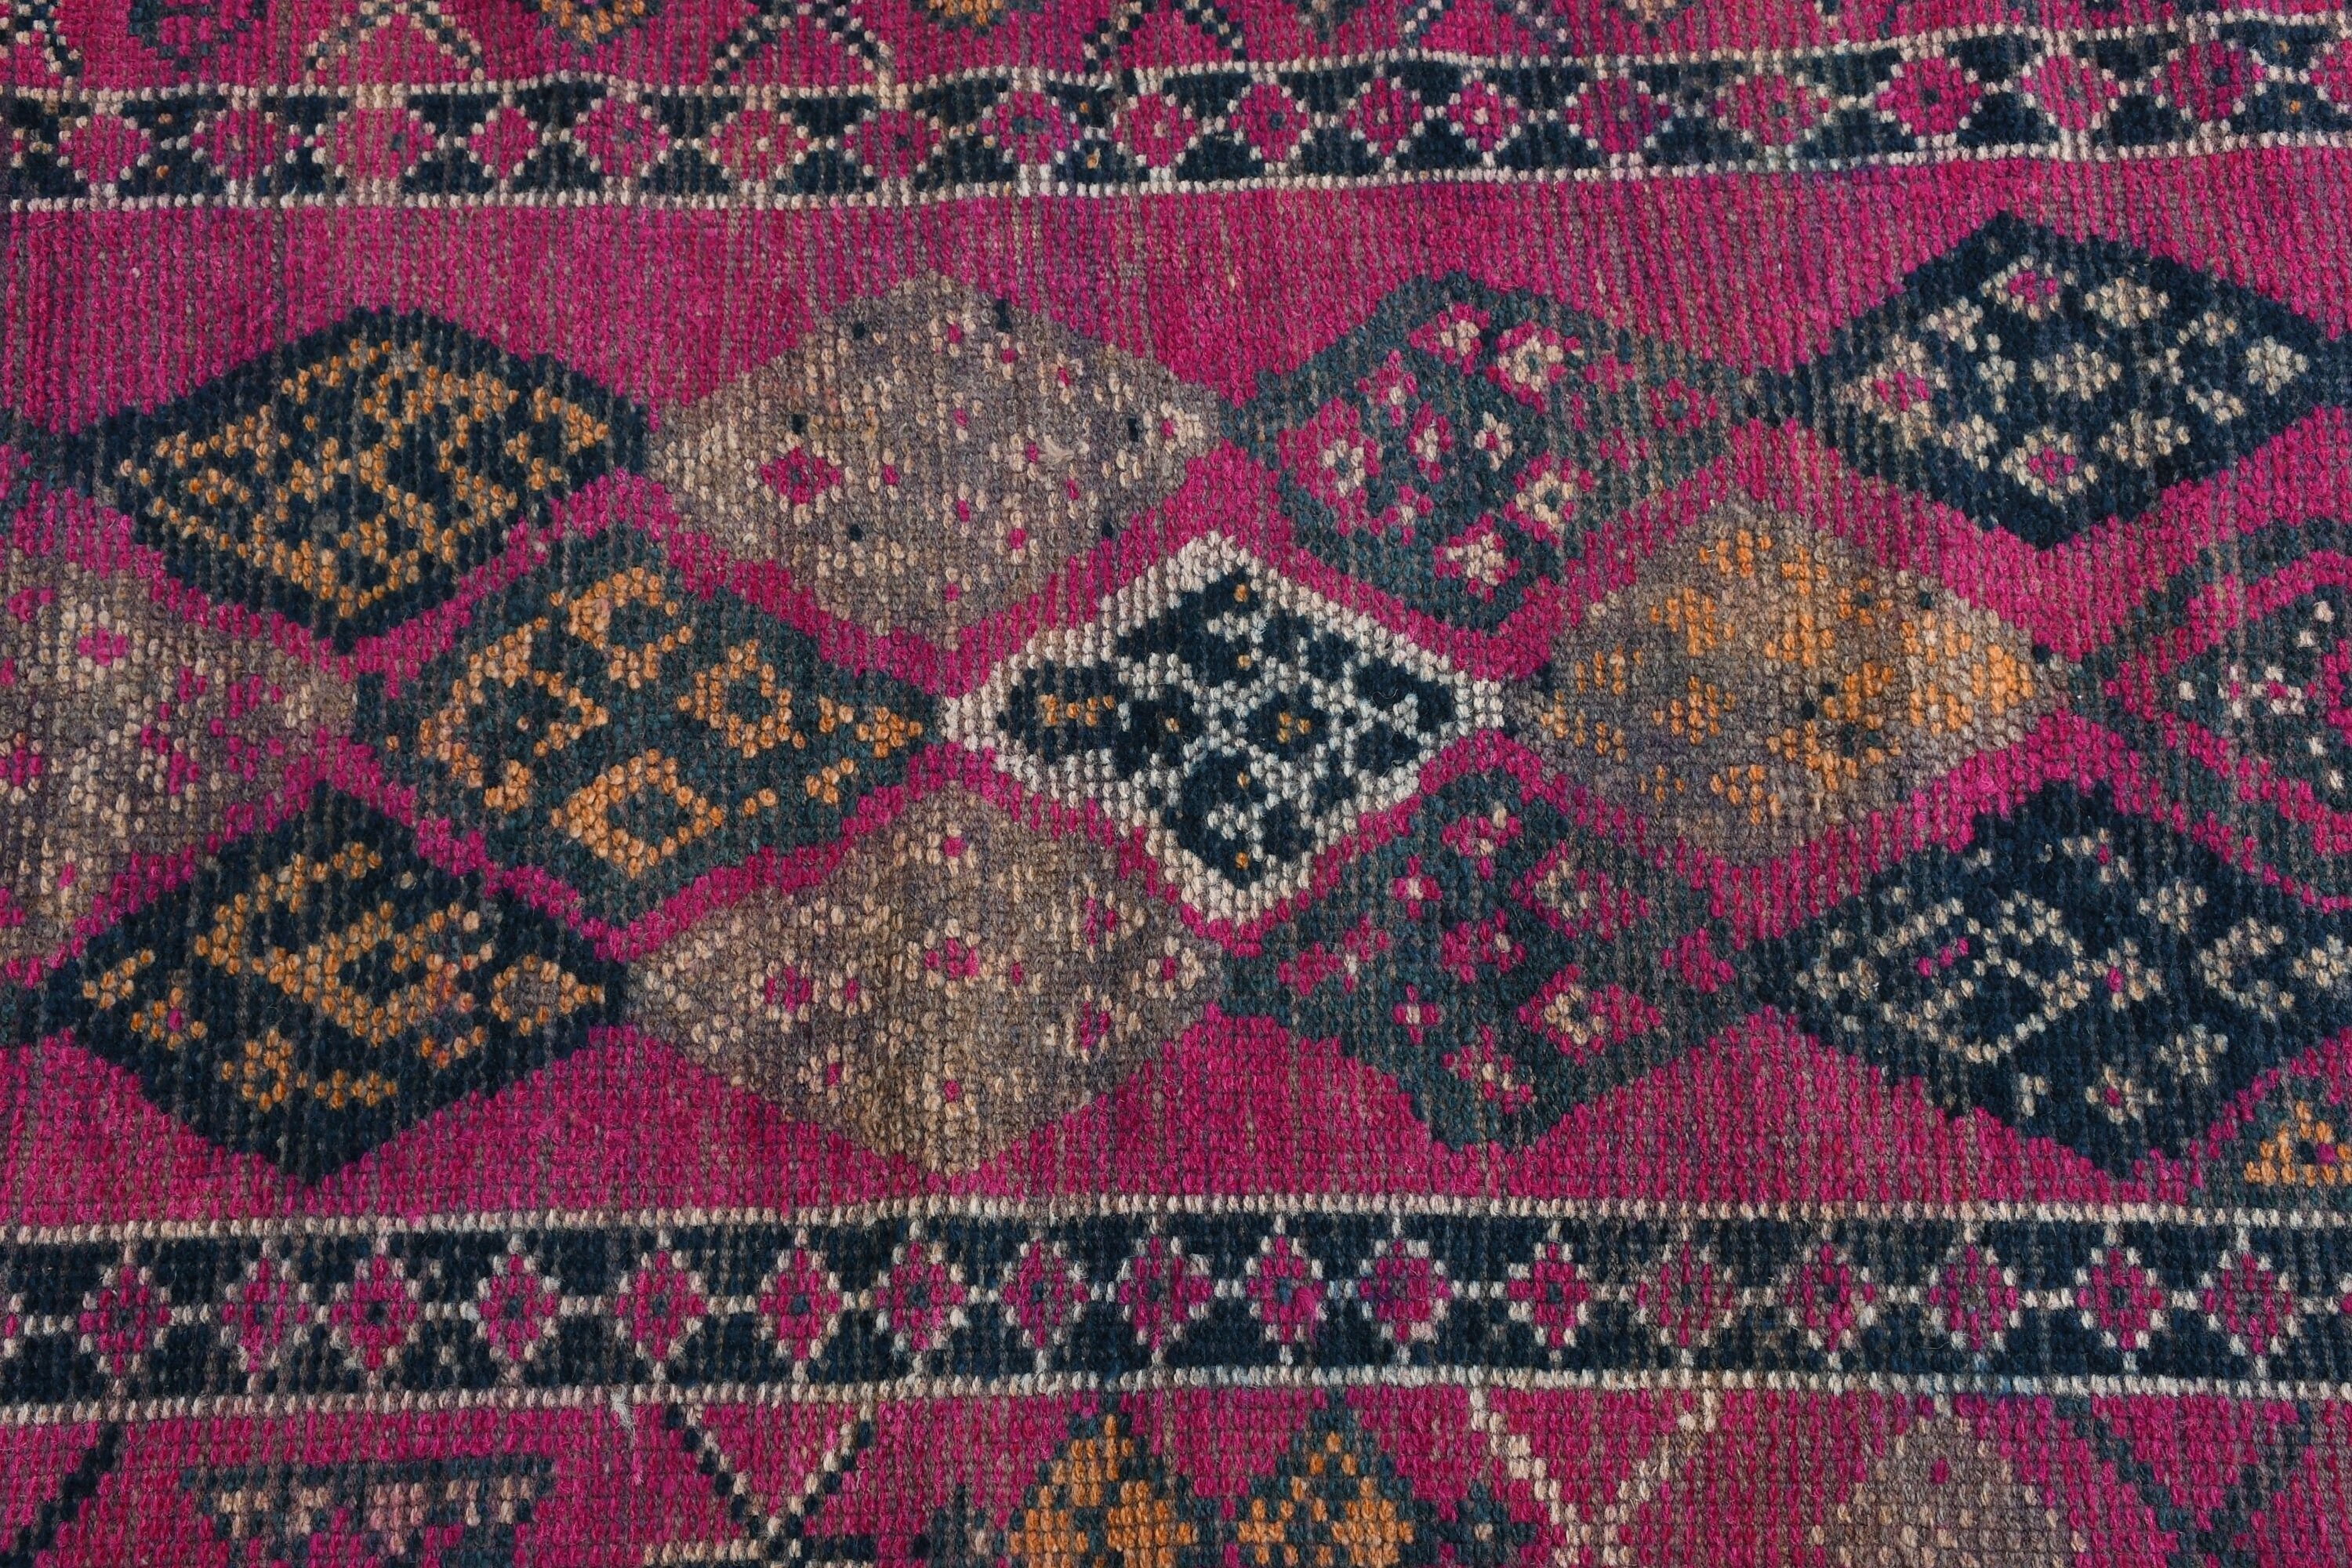 Pink Oushak Rug, Turkish Rug, Rugs for Kitchen, Home Decor Rug, Stair Rugs, Kitchen Rug, Vintage Rugs, 2.6x11 ft Runner Rugs